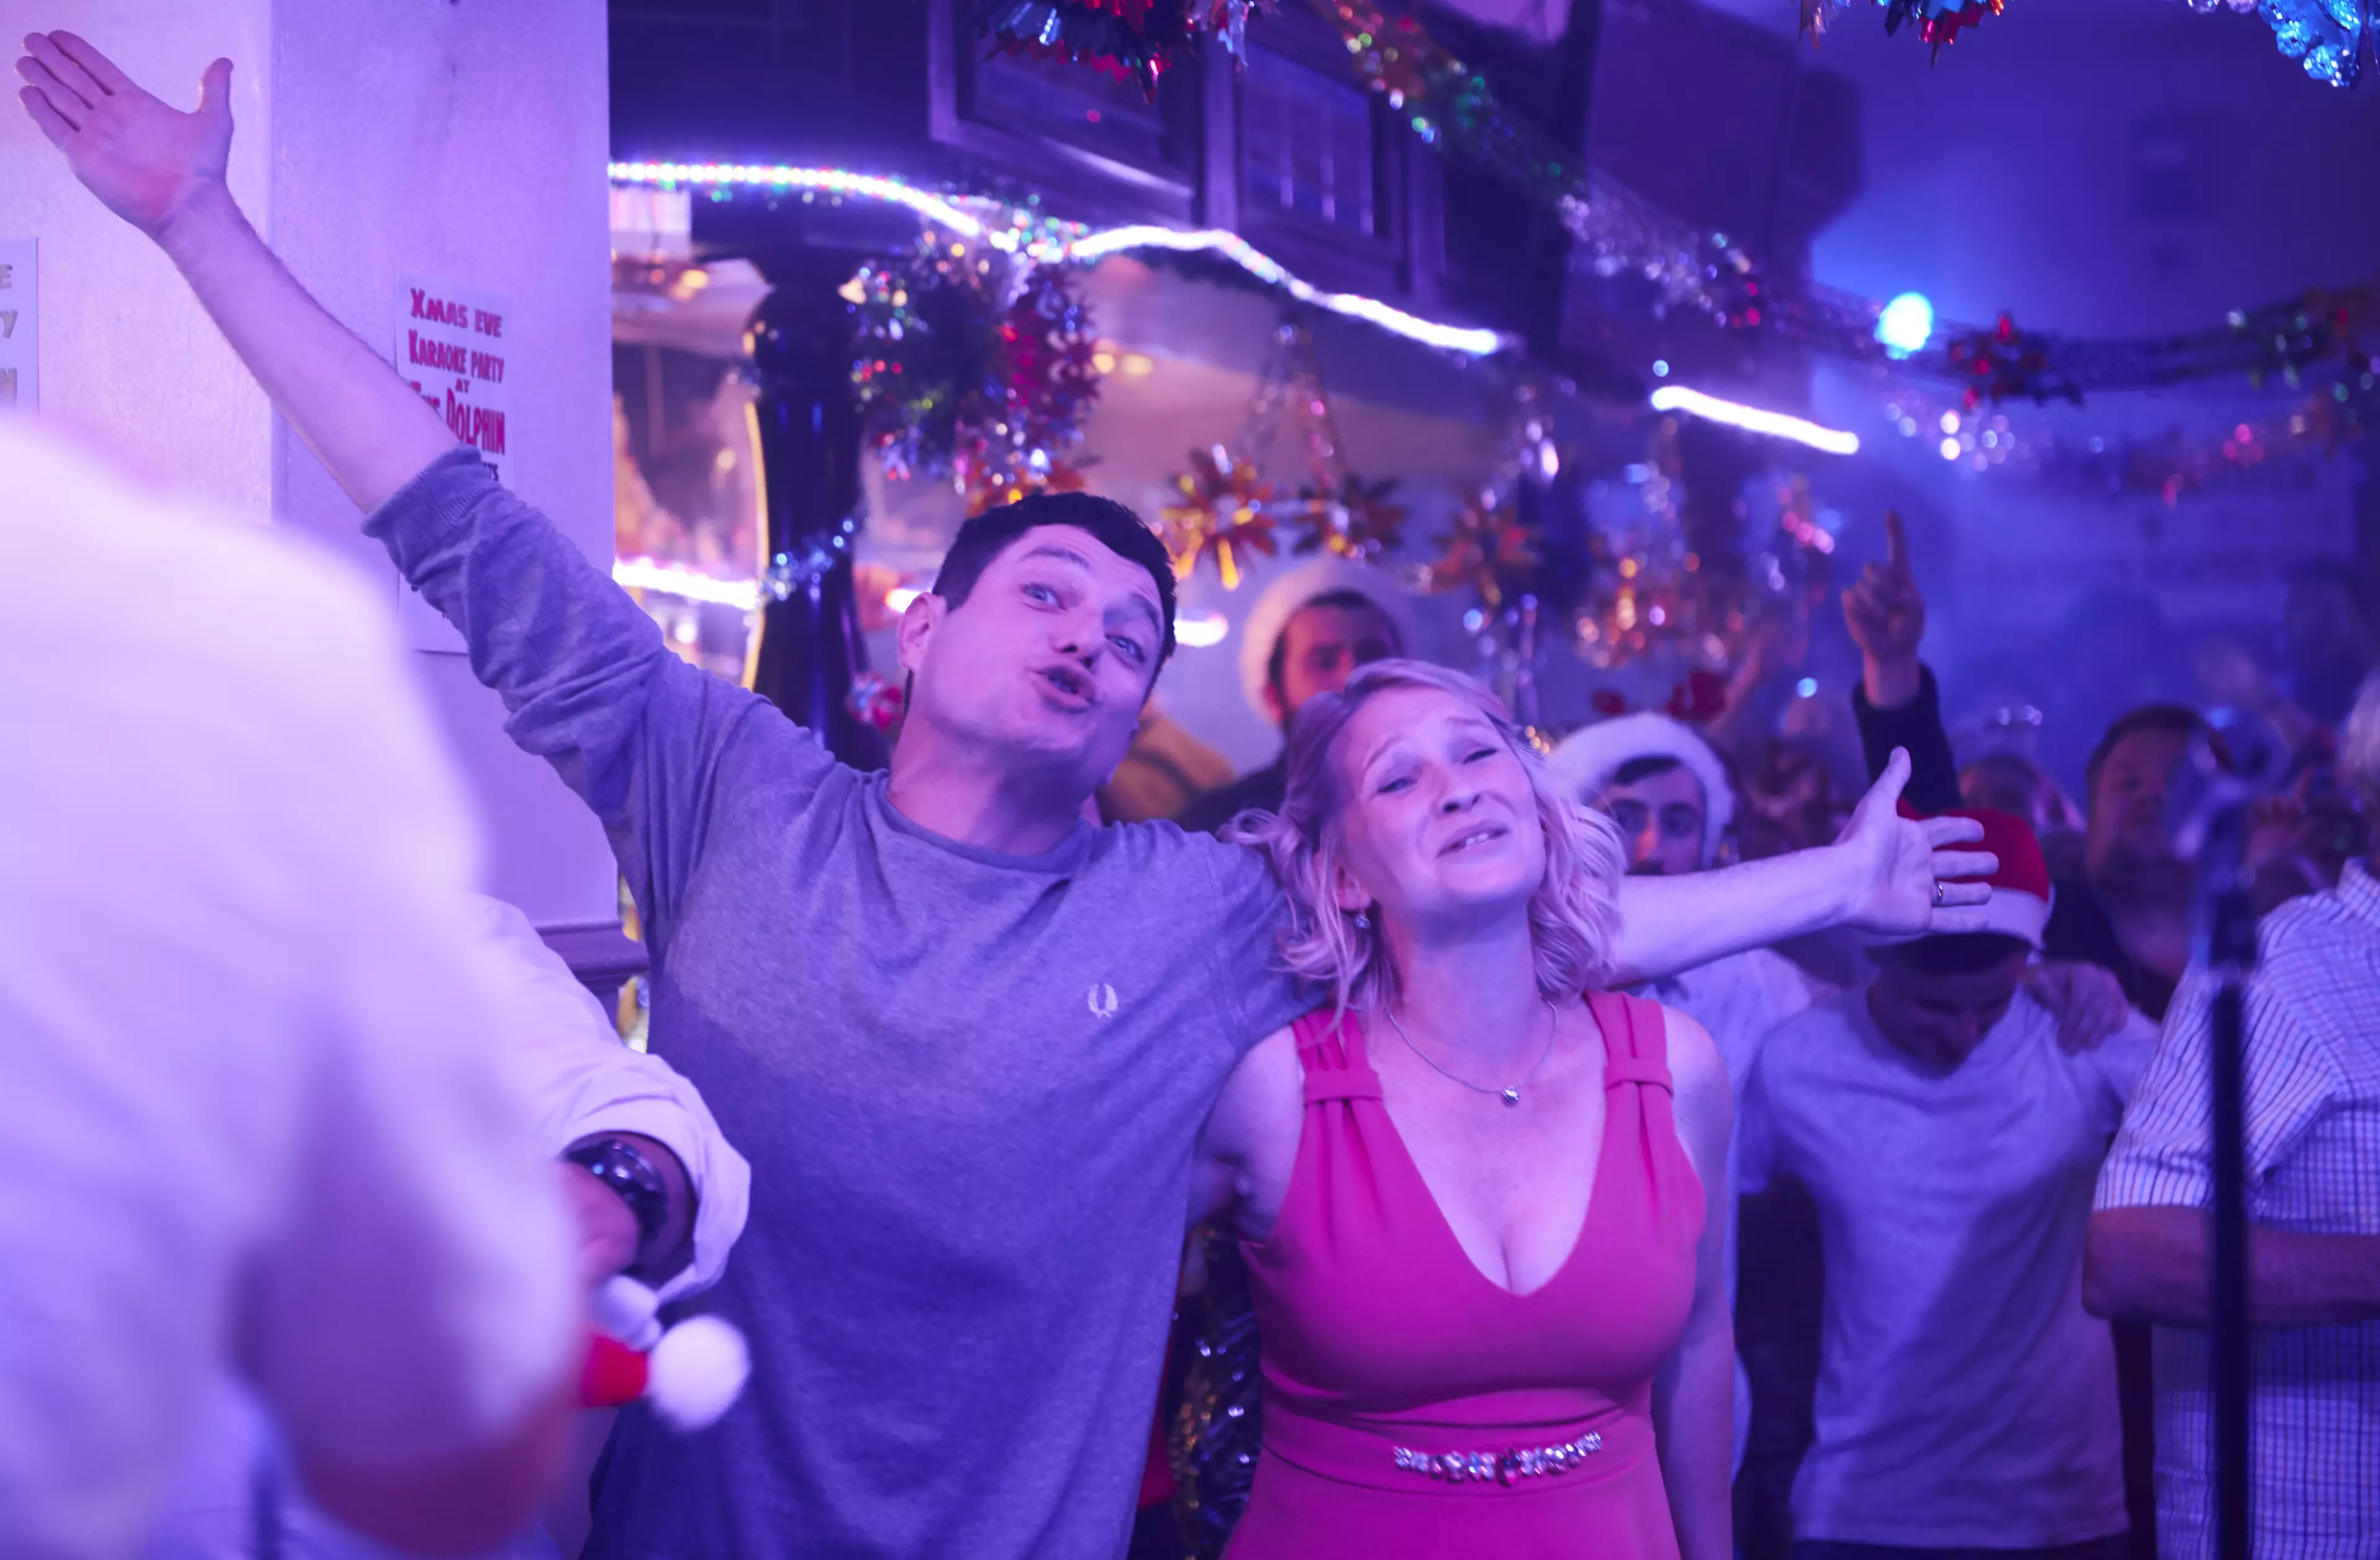 Gavin and Stacey airs on BBC1 on 25 December 2019 (